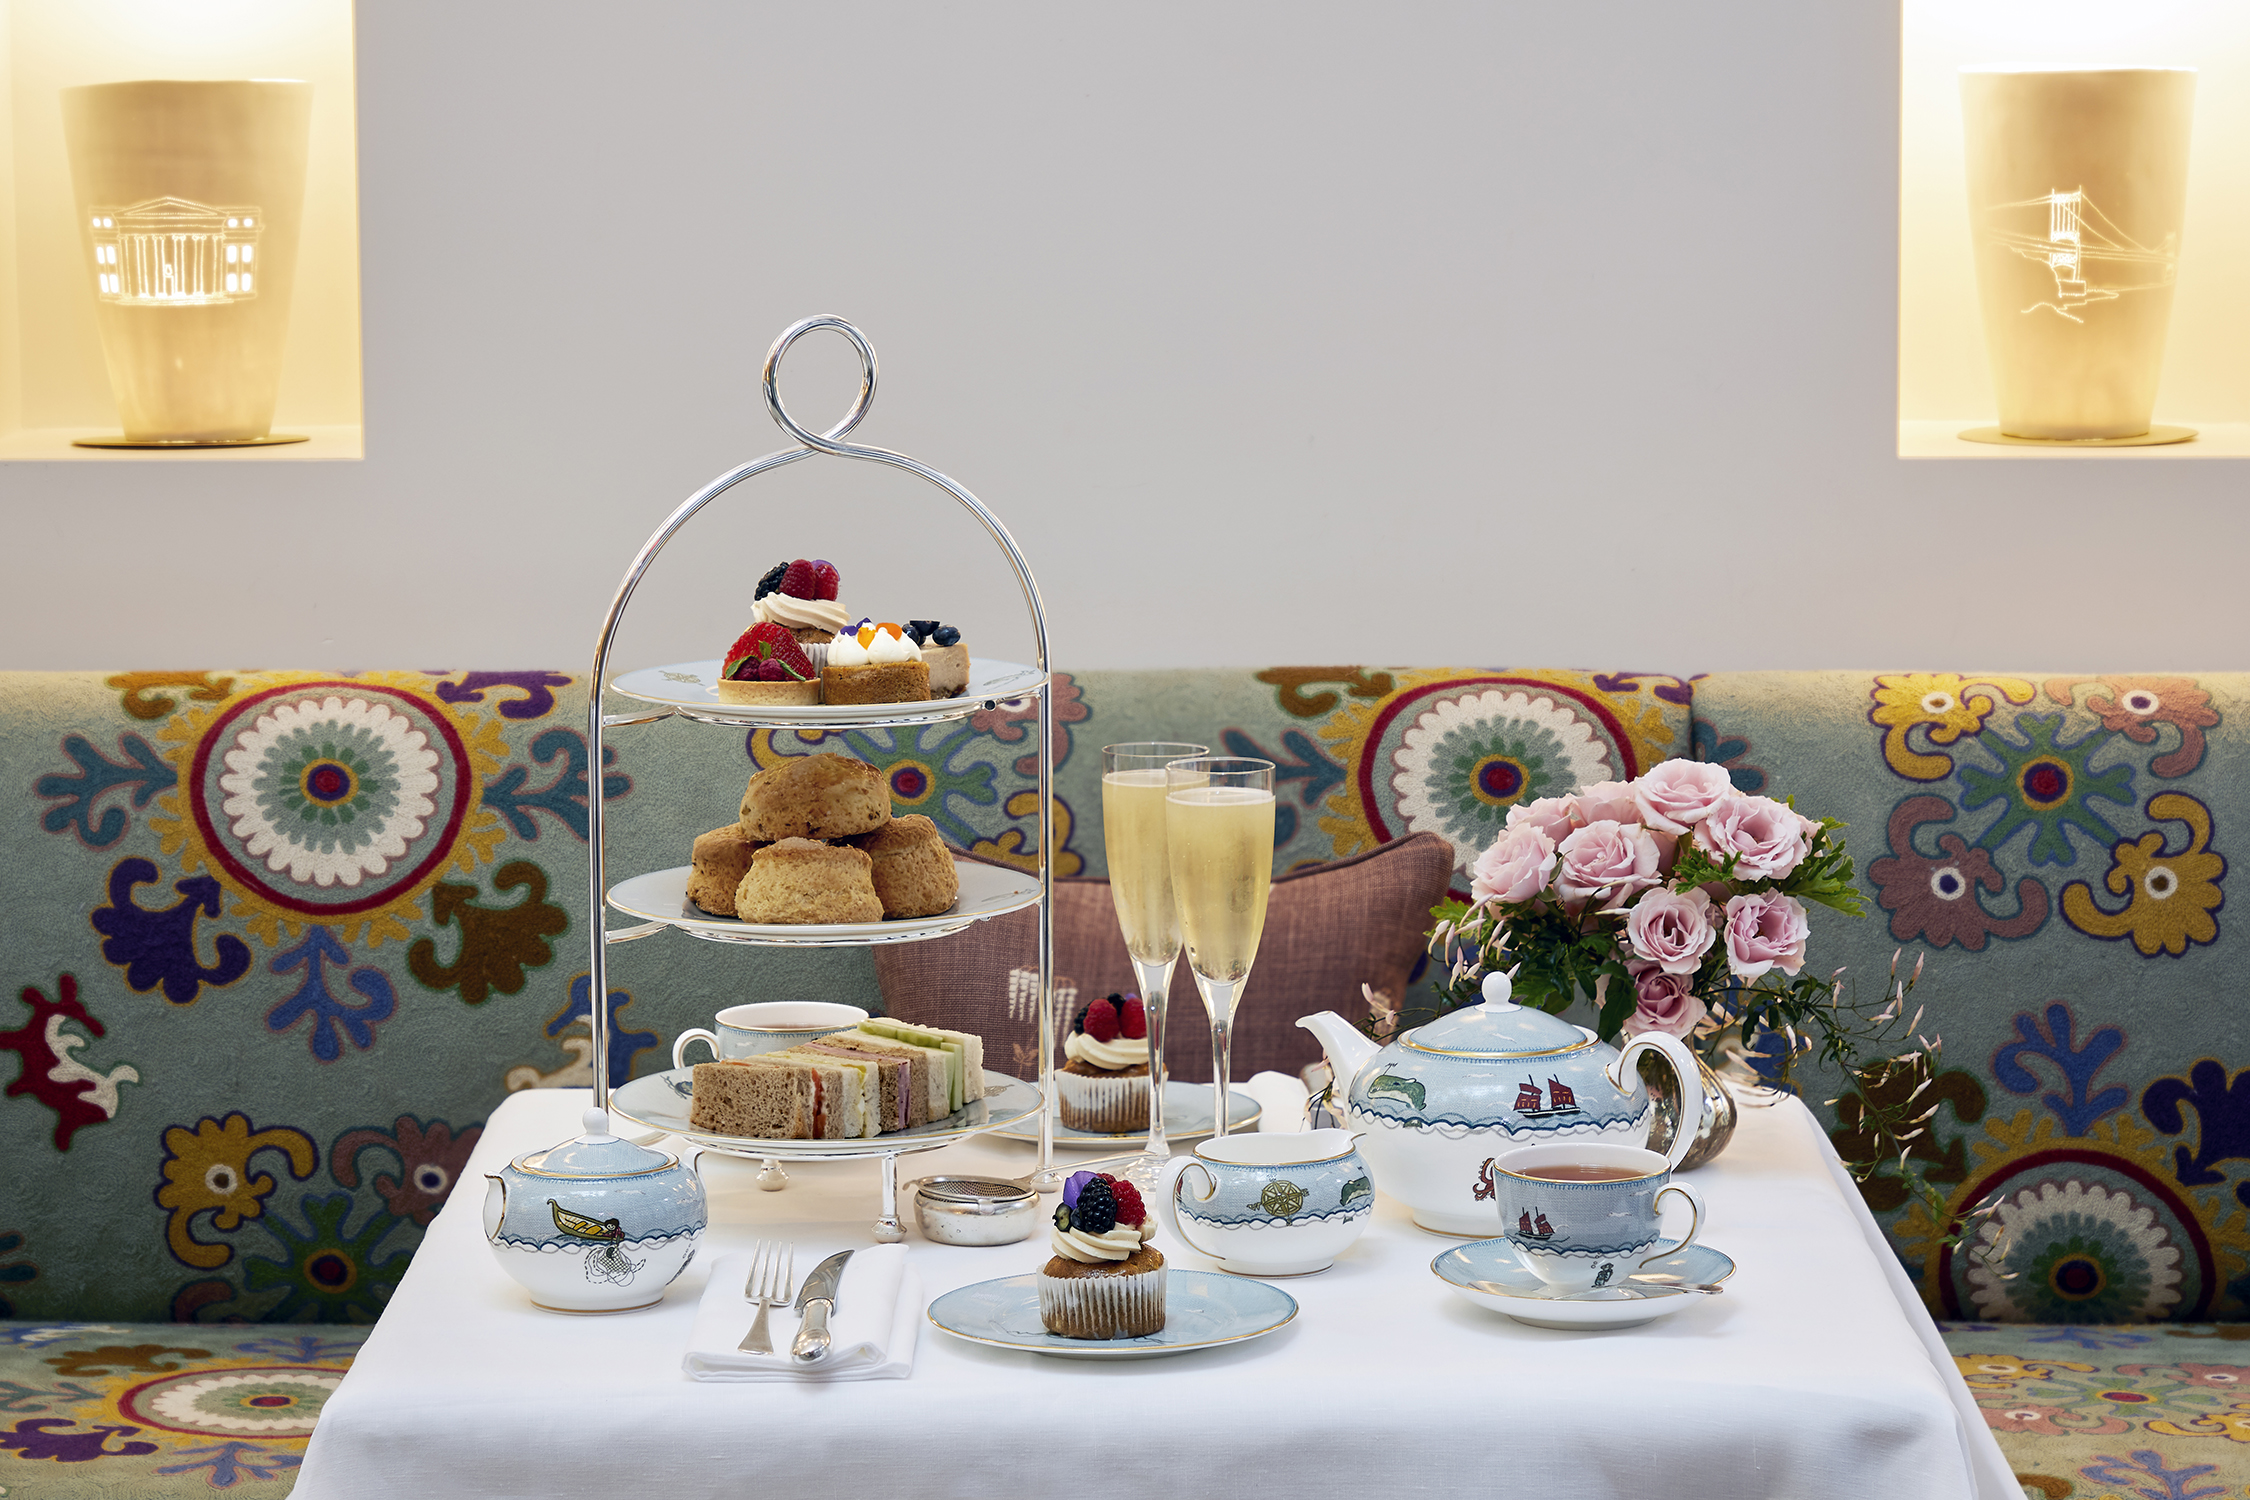 Champagne Afternoon Tea for two, served in The Whitby Restaurant, with sweet and savory treats such as finger sandwiches, scones and cakes, as well as tea served in Kit Kemp's bone china range Mythical Creatures from Wedgwood.